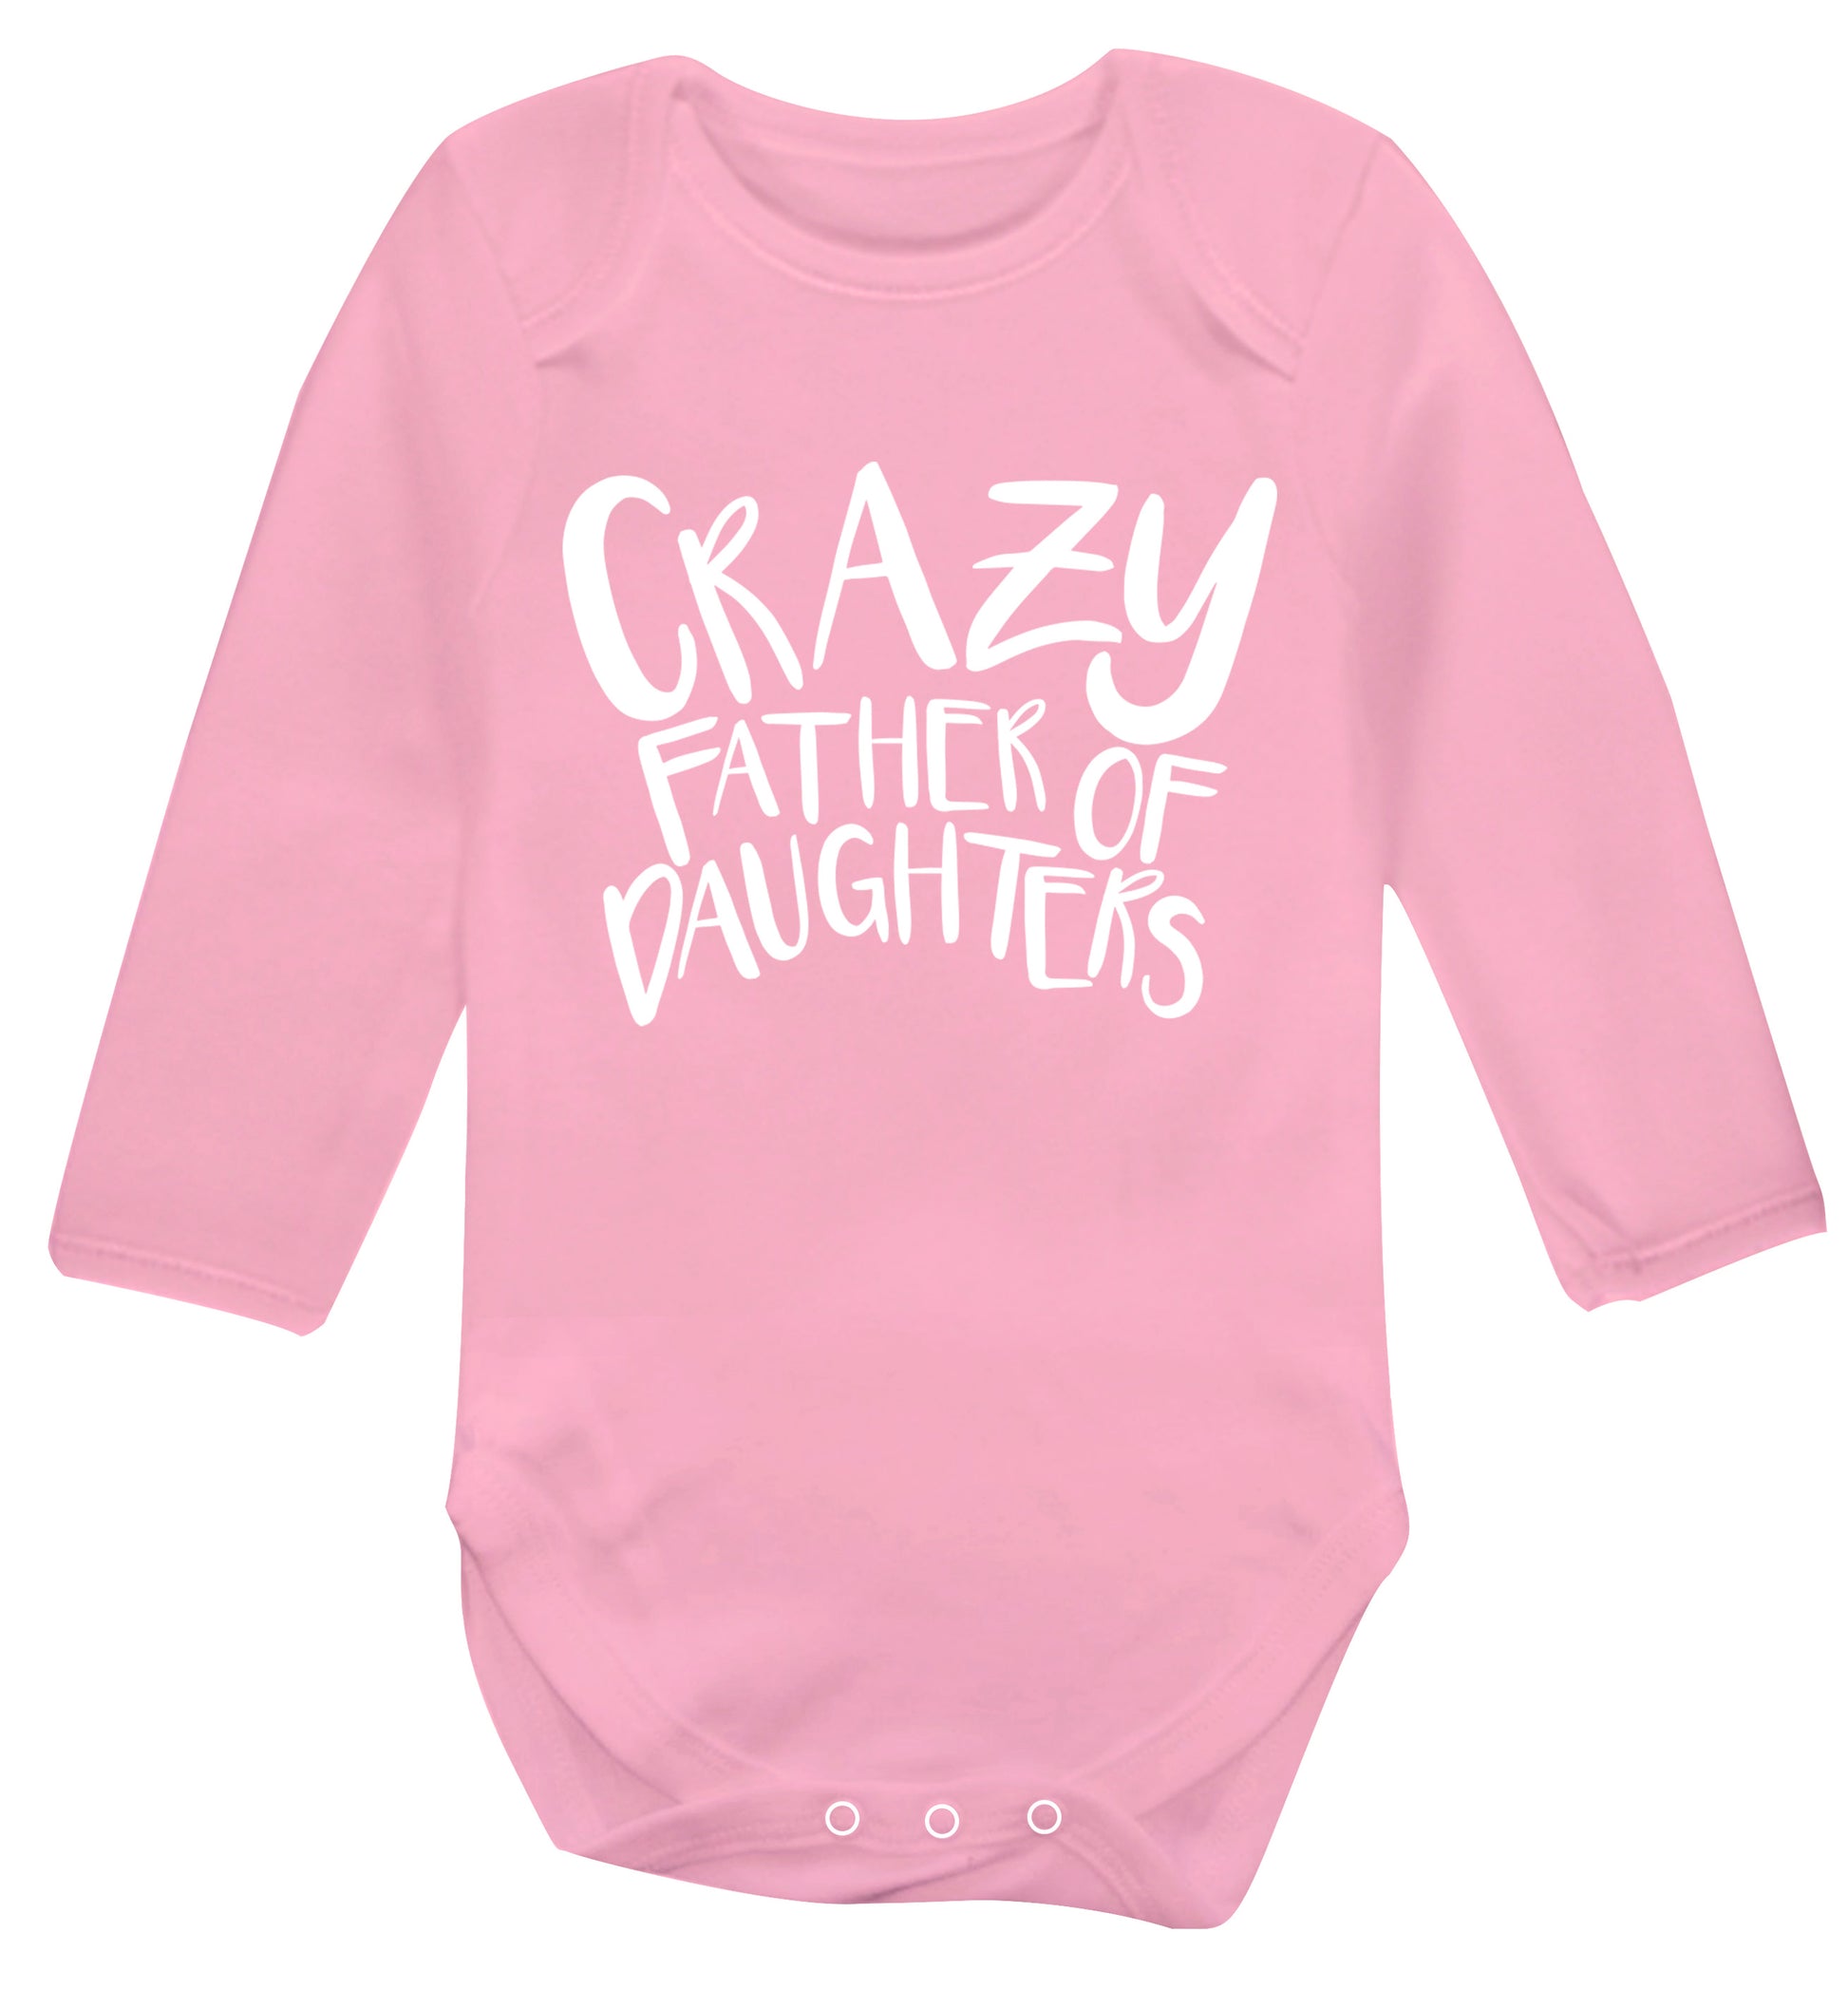 Crazy father of daughters Baby Vest long sleeved pale pink 6-12 months